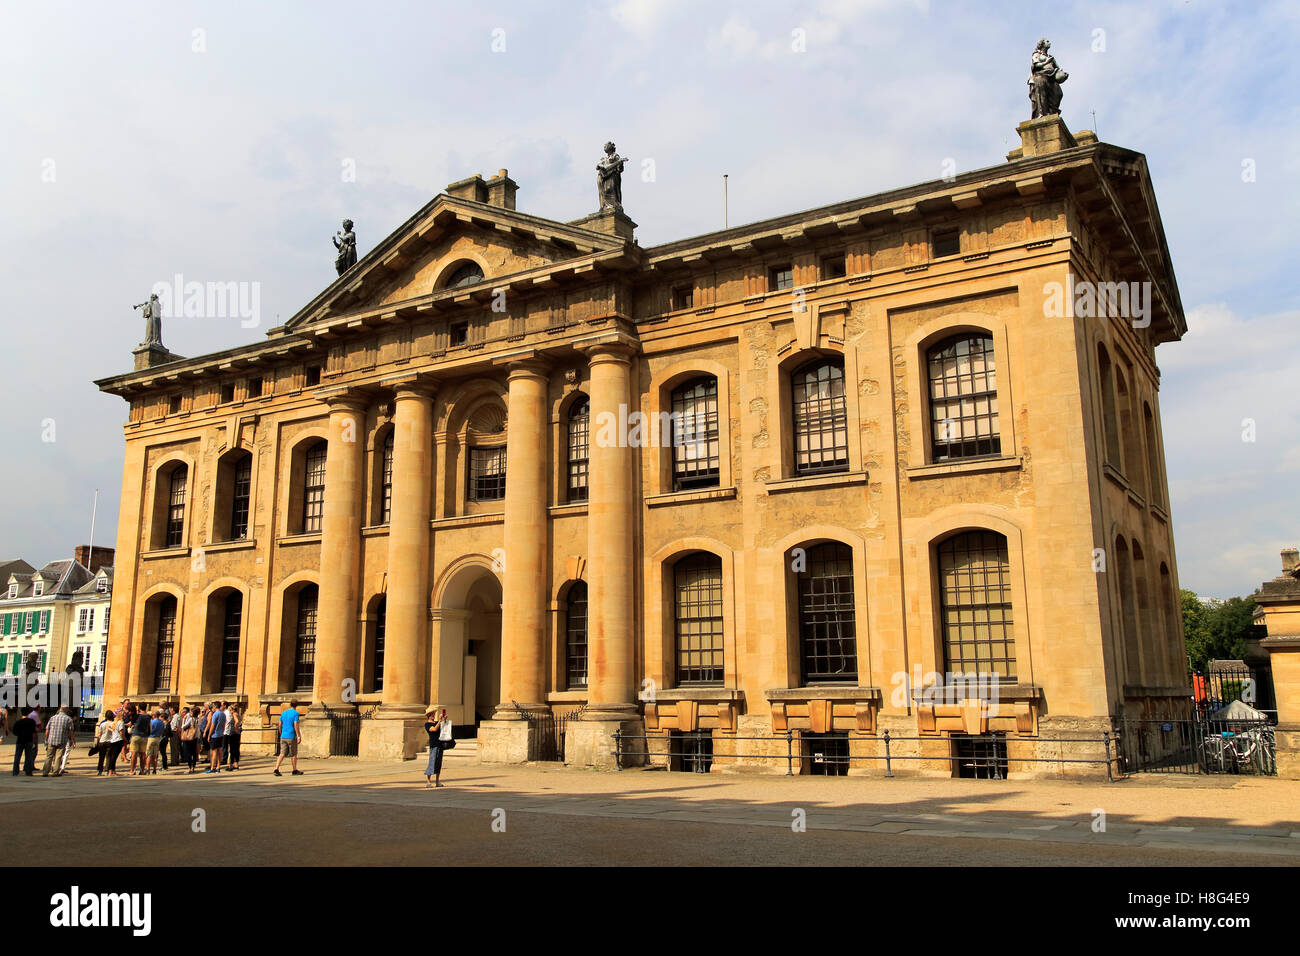 Clarendon Building Early 18th Century Neoclassical Architecture